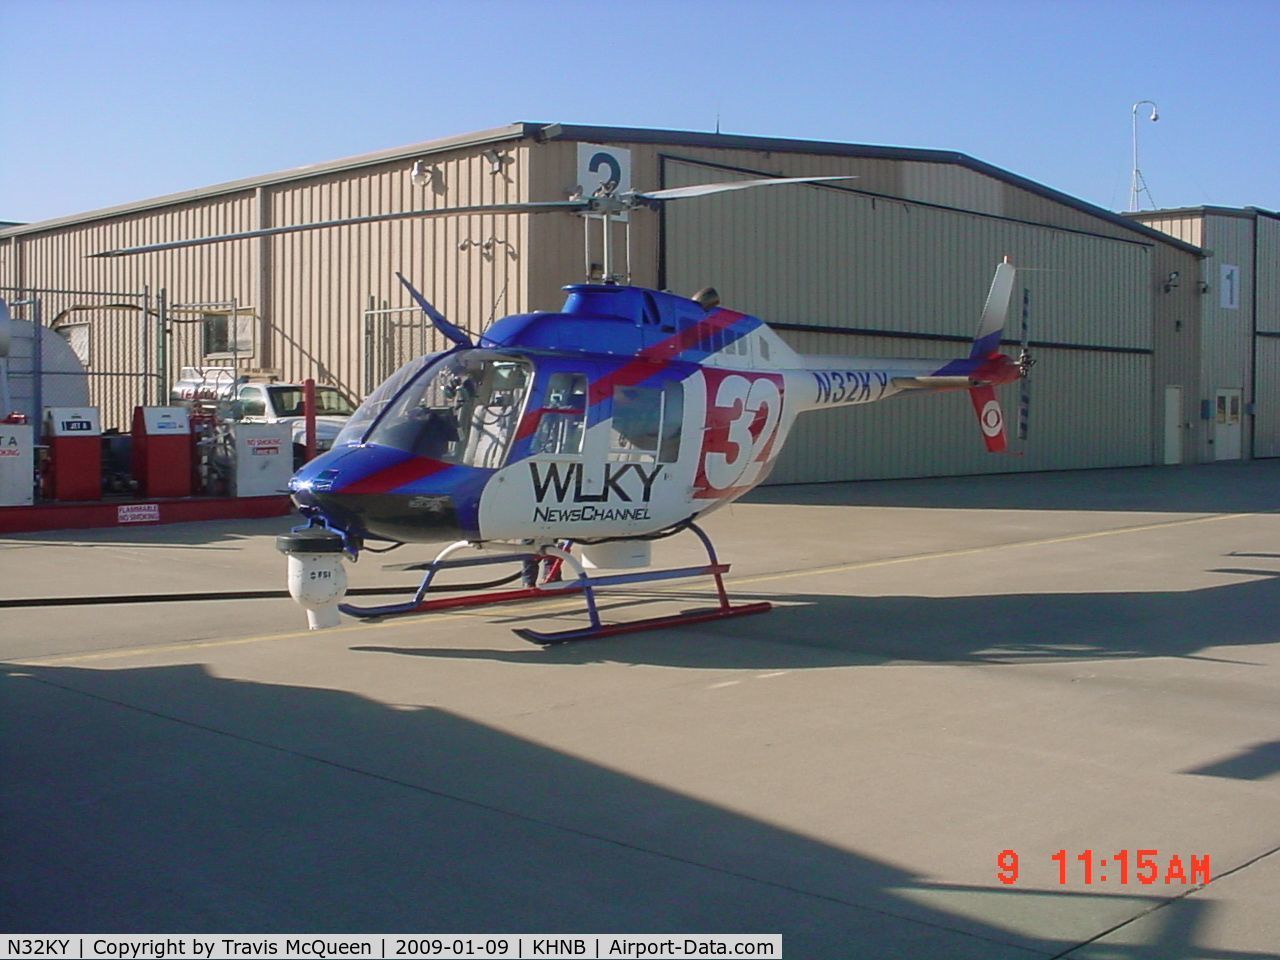 N32KY, 1979 Bell 206B C/N 2875, Parked on ramp @ KHNB on 1/9/09... In front of DCFS...